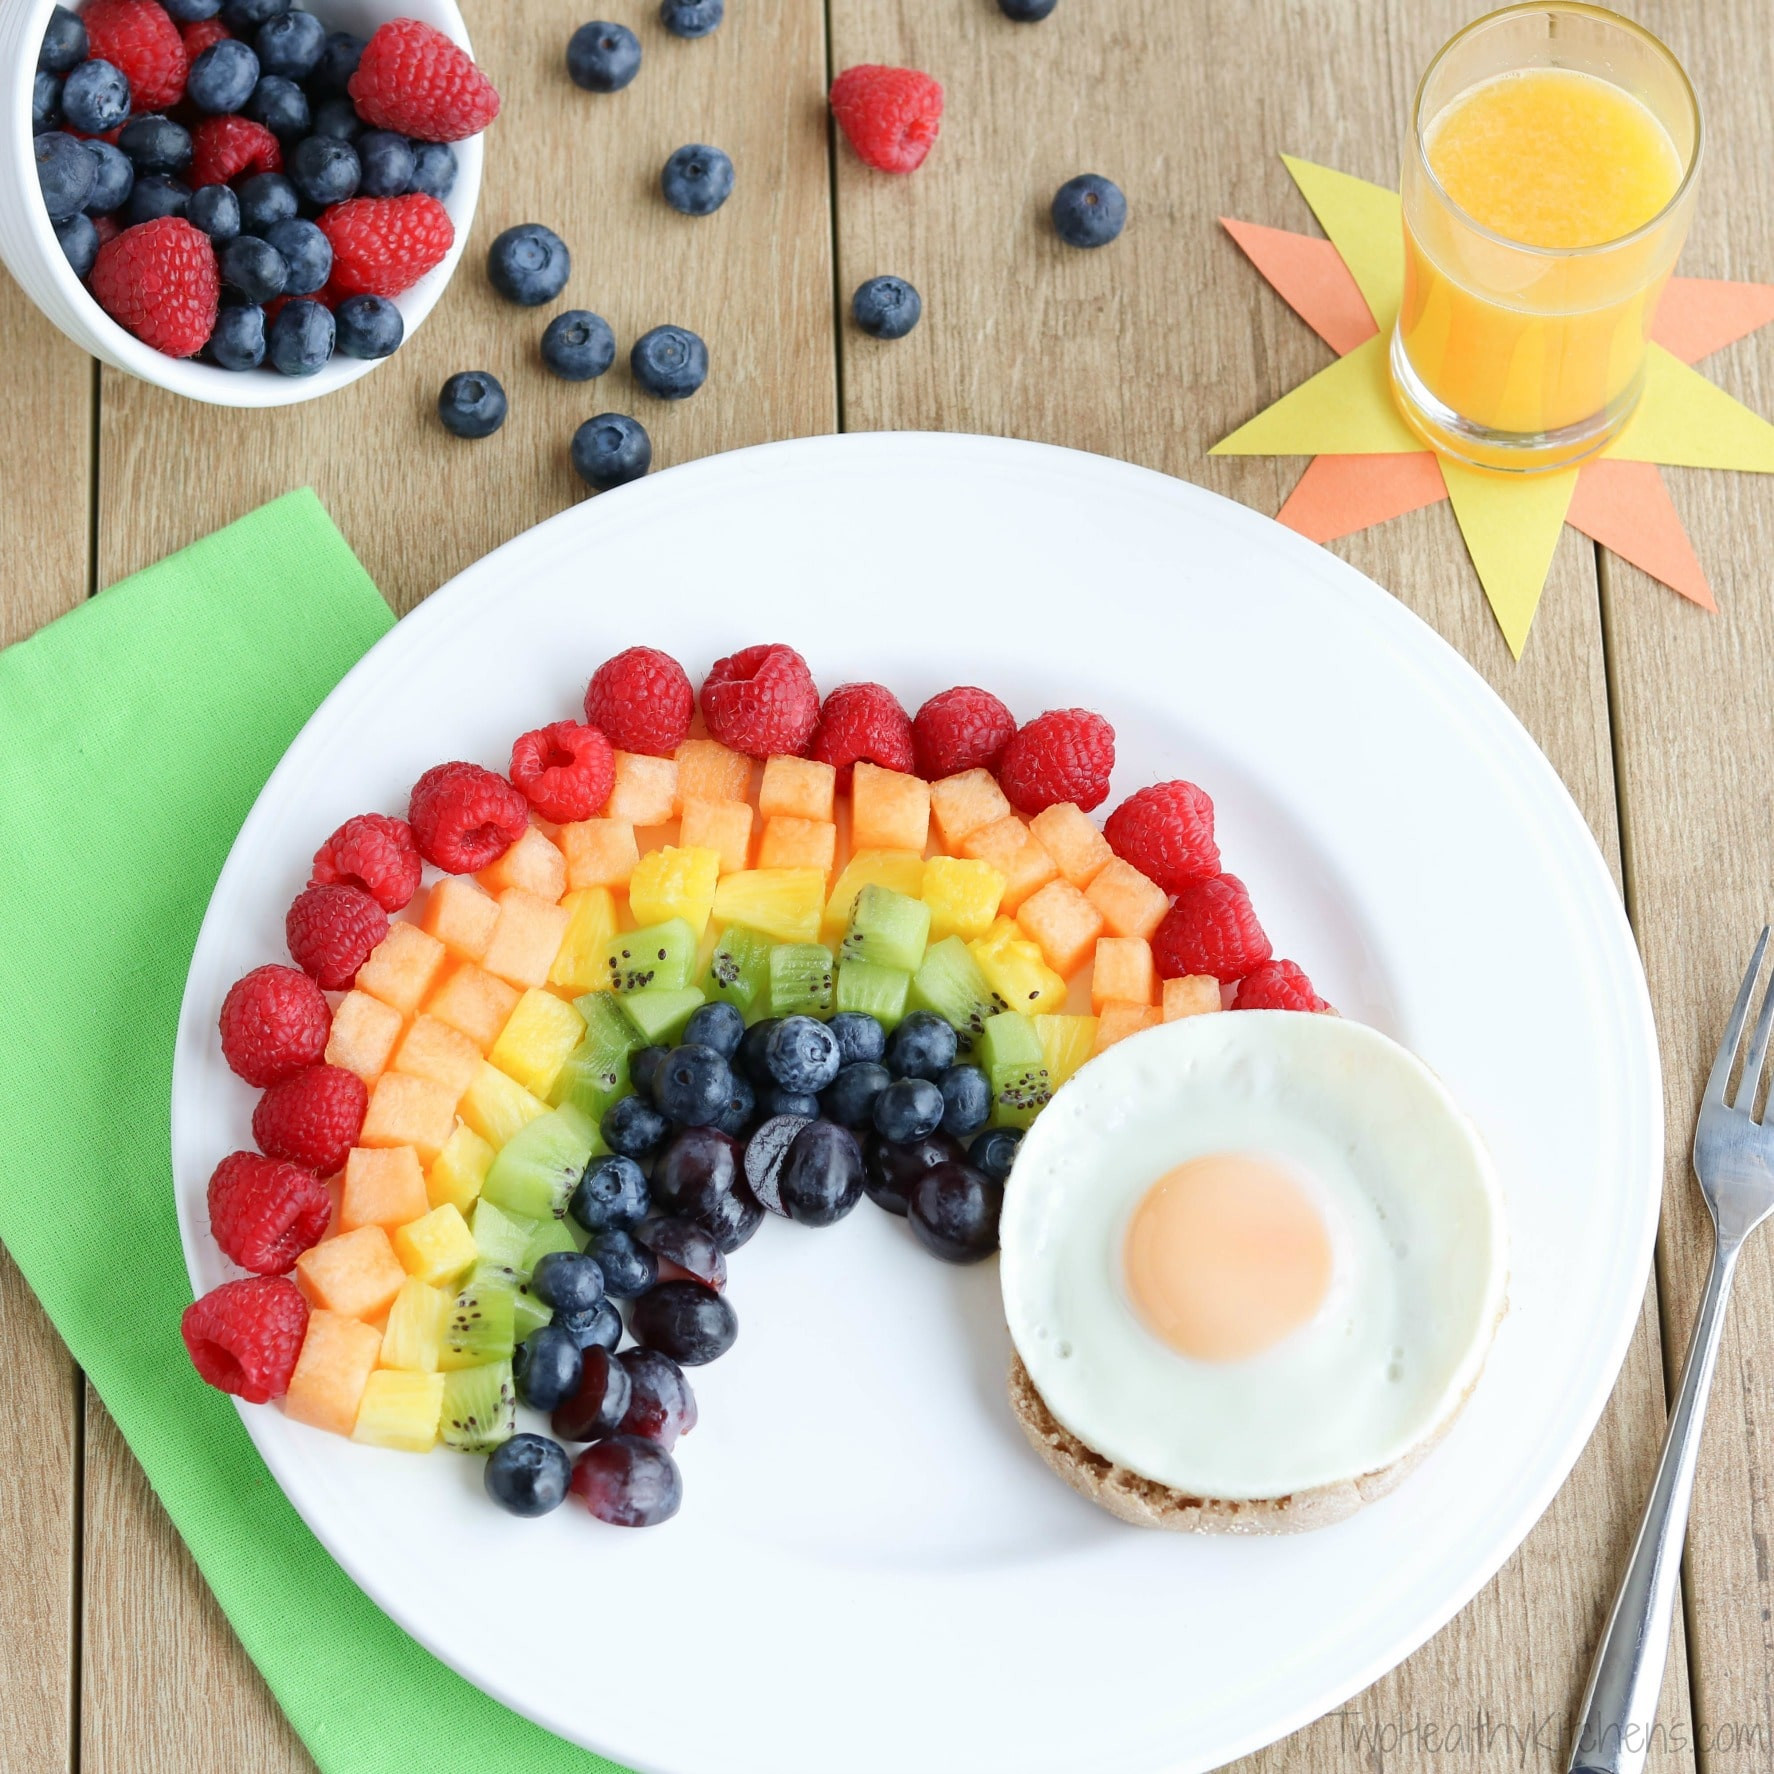 Breakfast Food for Kids Unique Fruit Rainbow with A Pot Of Gold Fun Breakfast Idea for